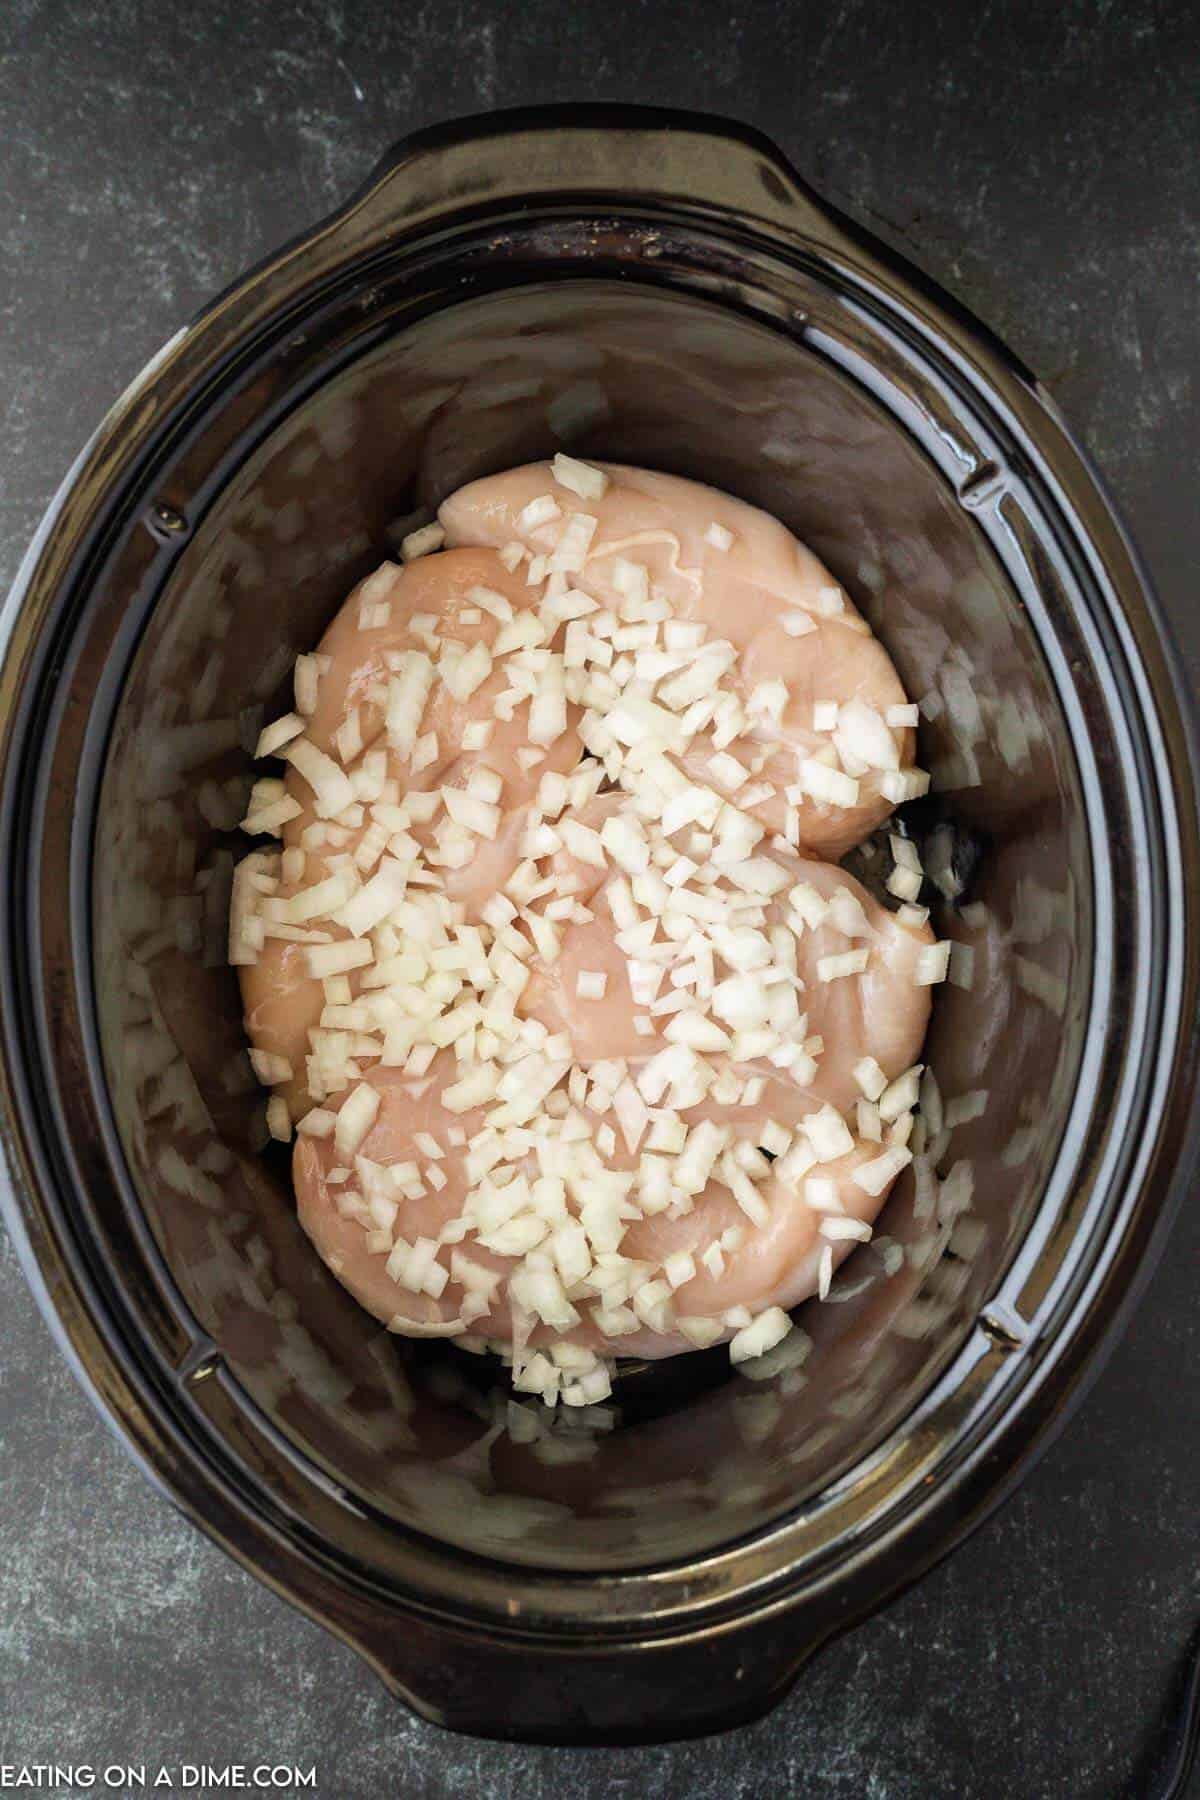 Place chicken in the slow cooker topped with chopped onions